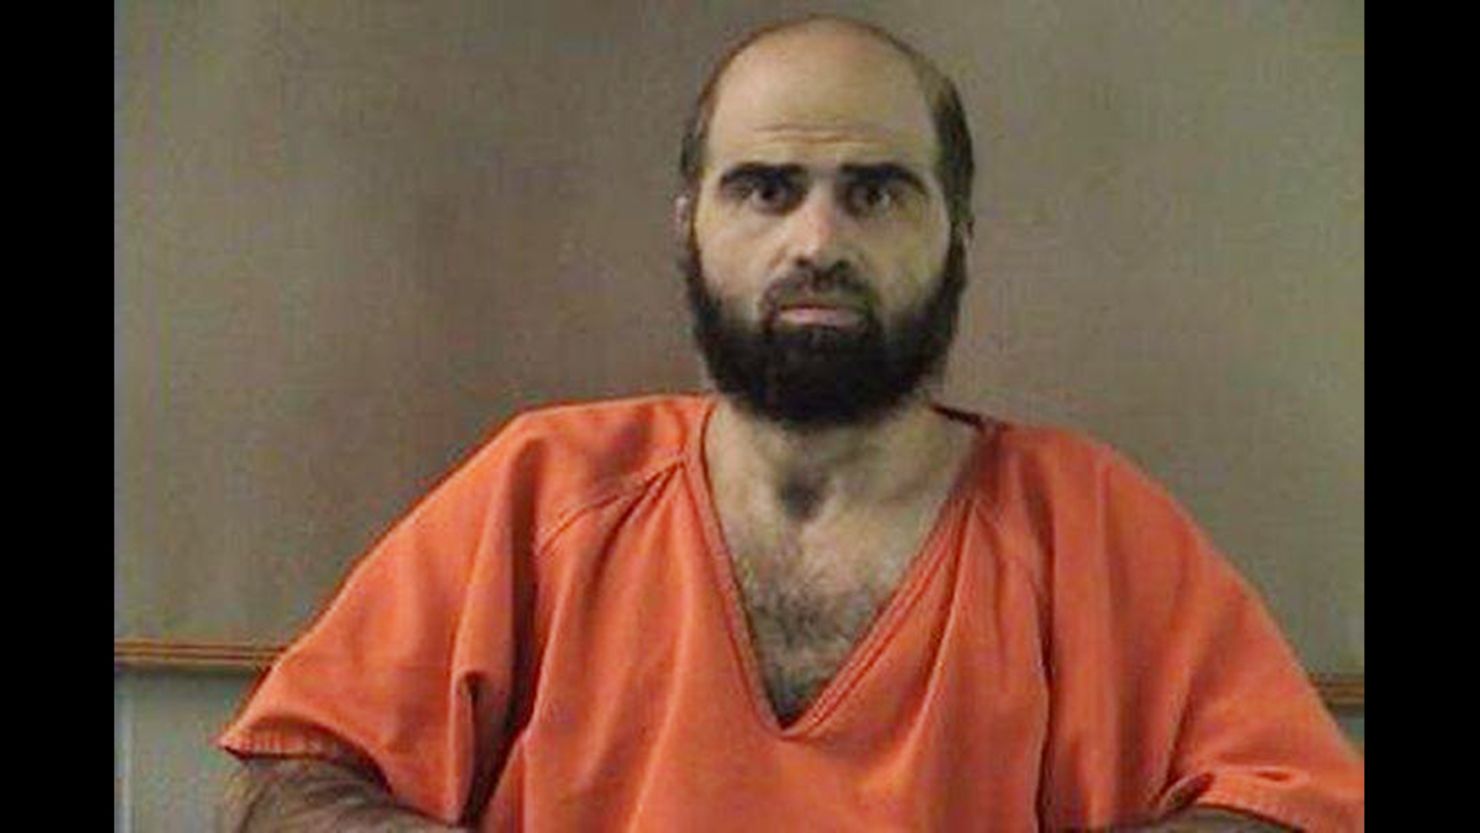 Maj. Nidal Hasan's court-martial has been repeatedly delayed since it was initially set to begin in March 2012.